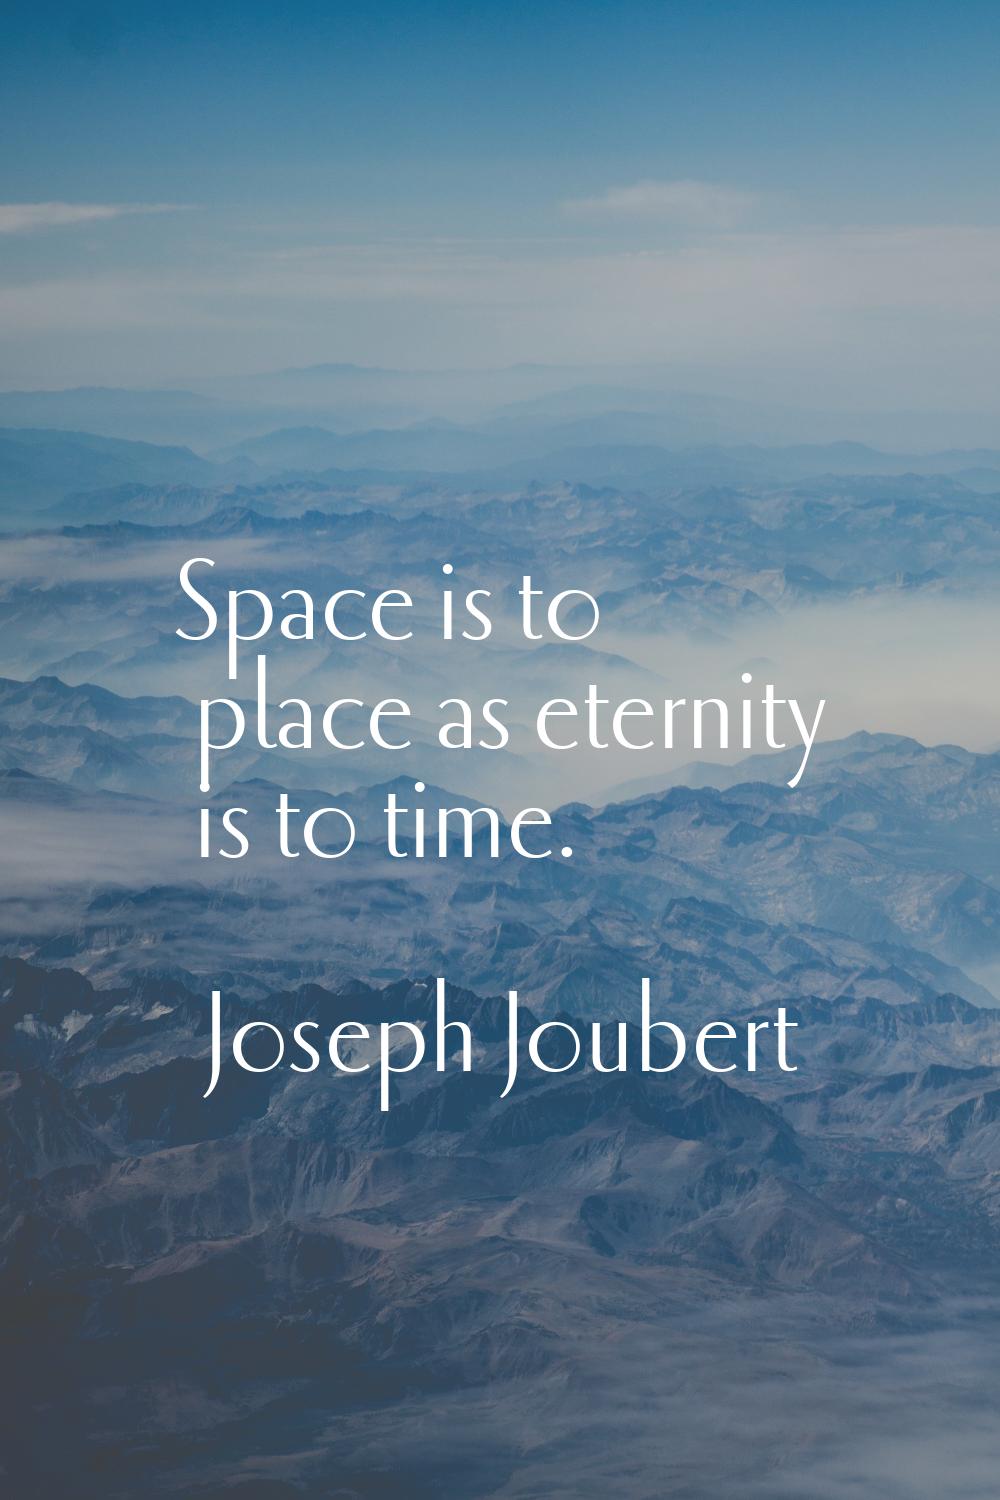 Space is to place as eternity is to time.